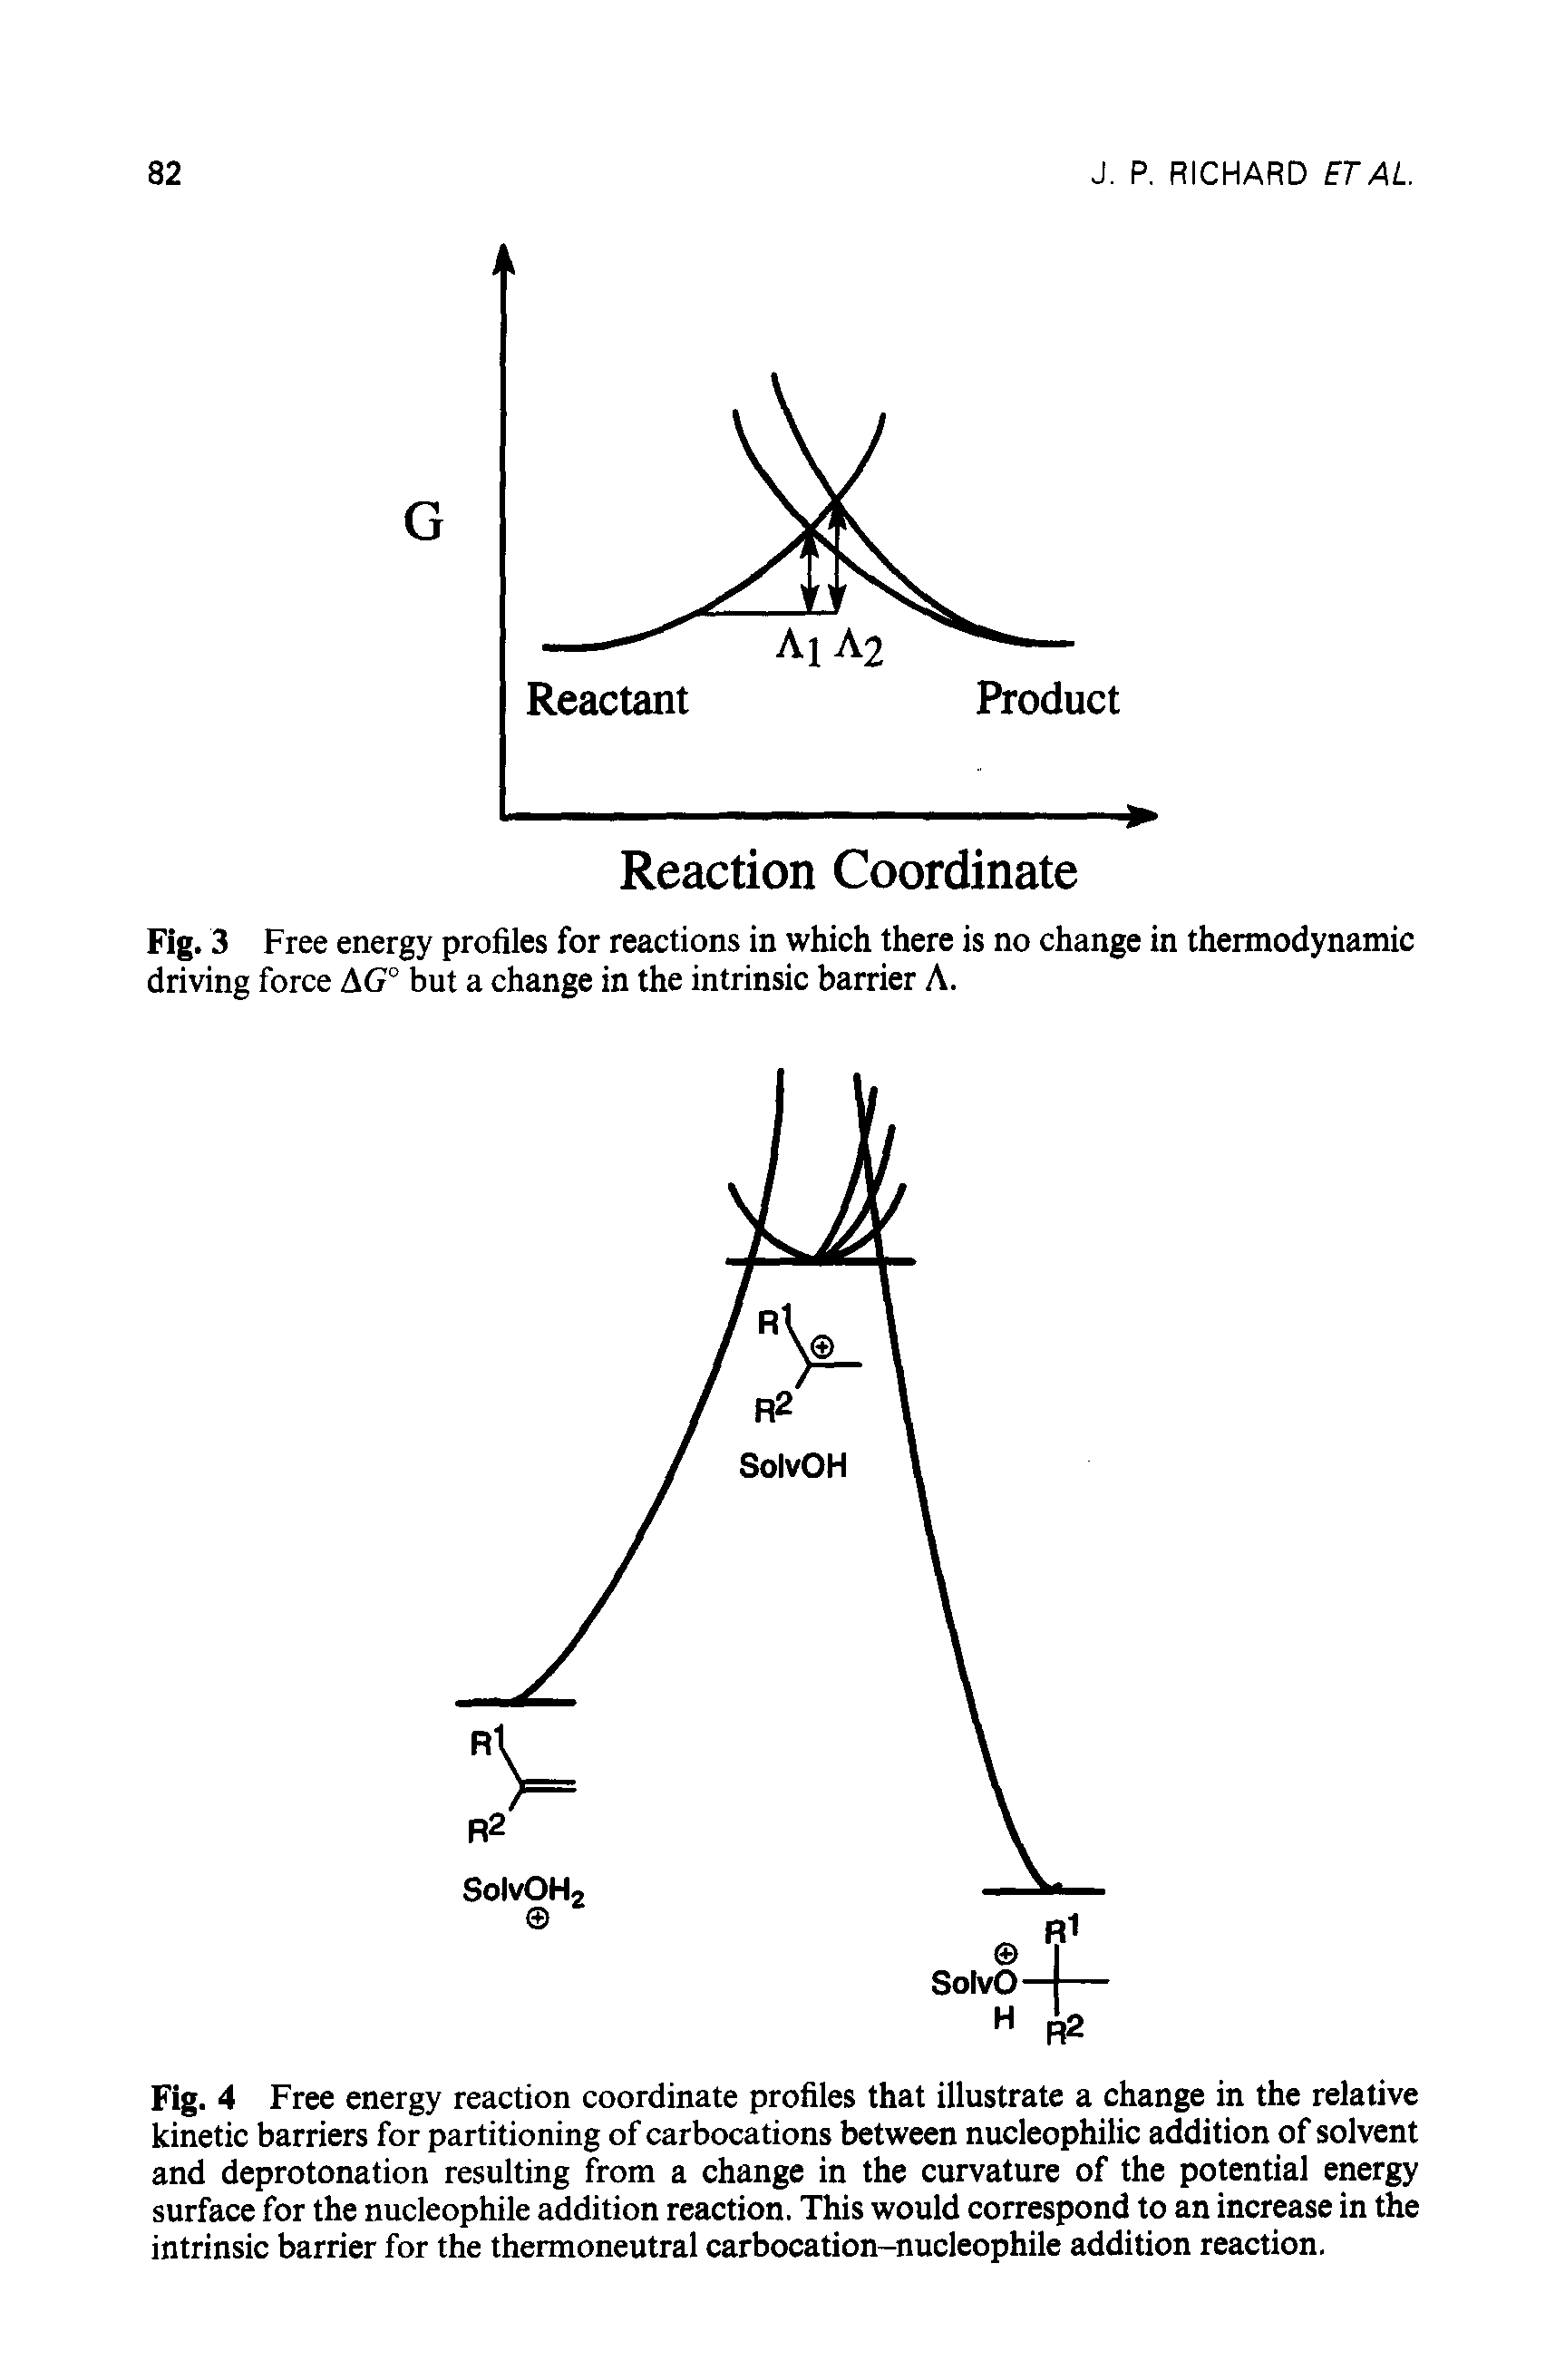 Fig. 3 Free energy profiles for reactions in which there is no change in thermodynamic driving force AG but a change in the intrinsic barrier A.